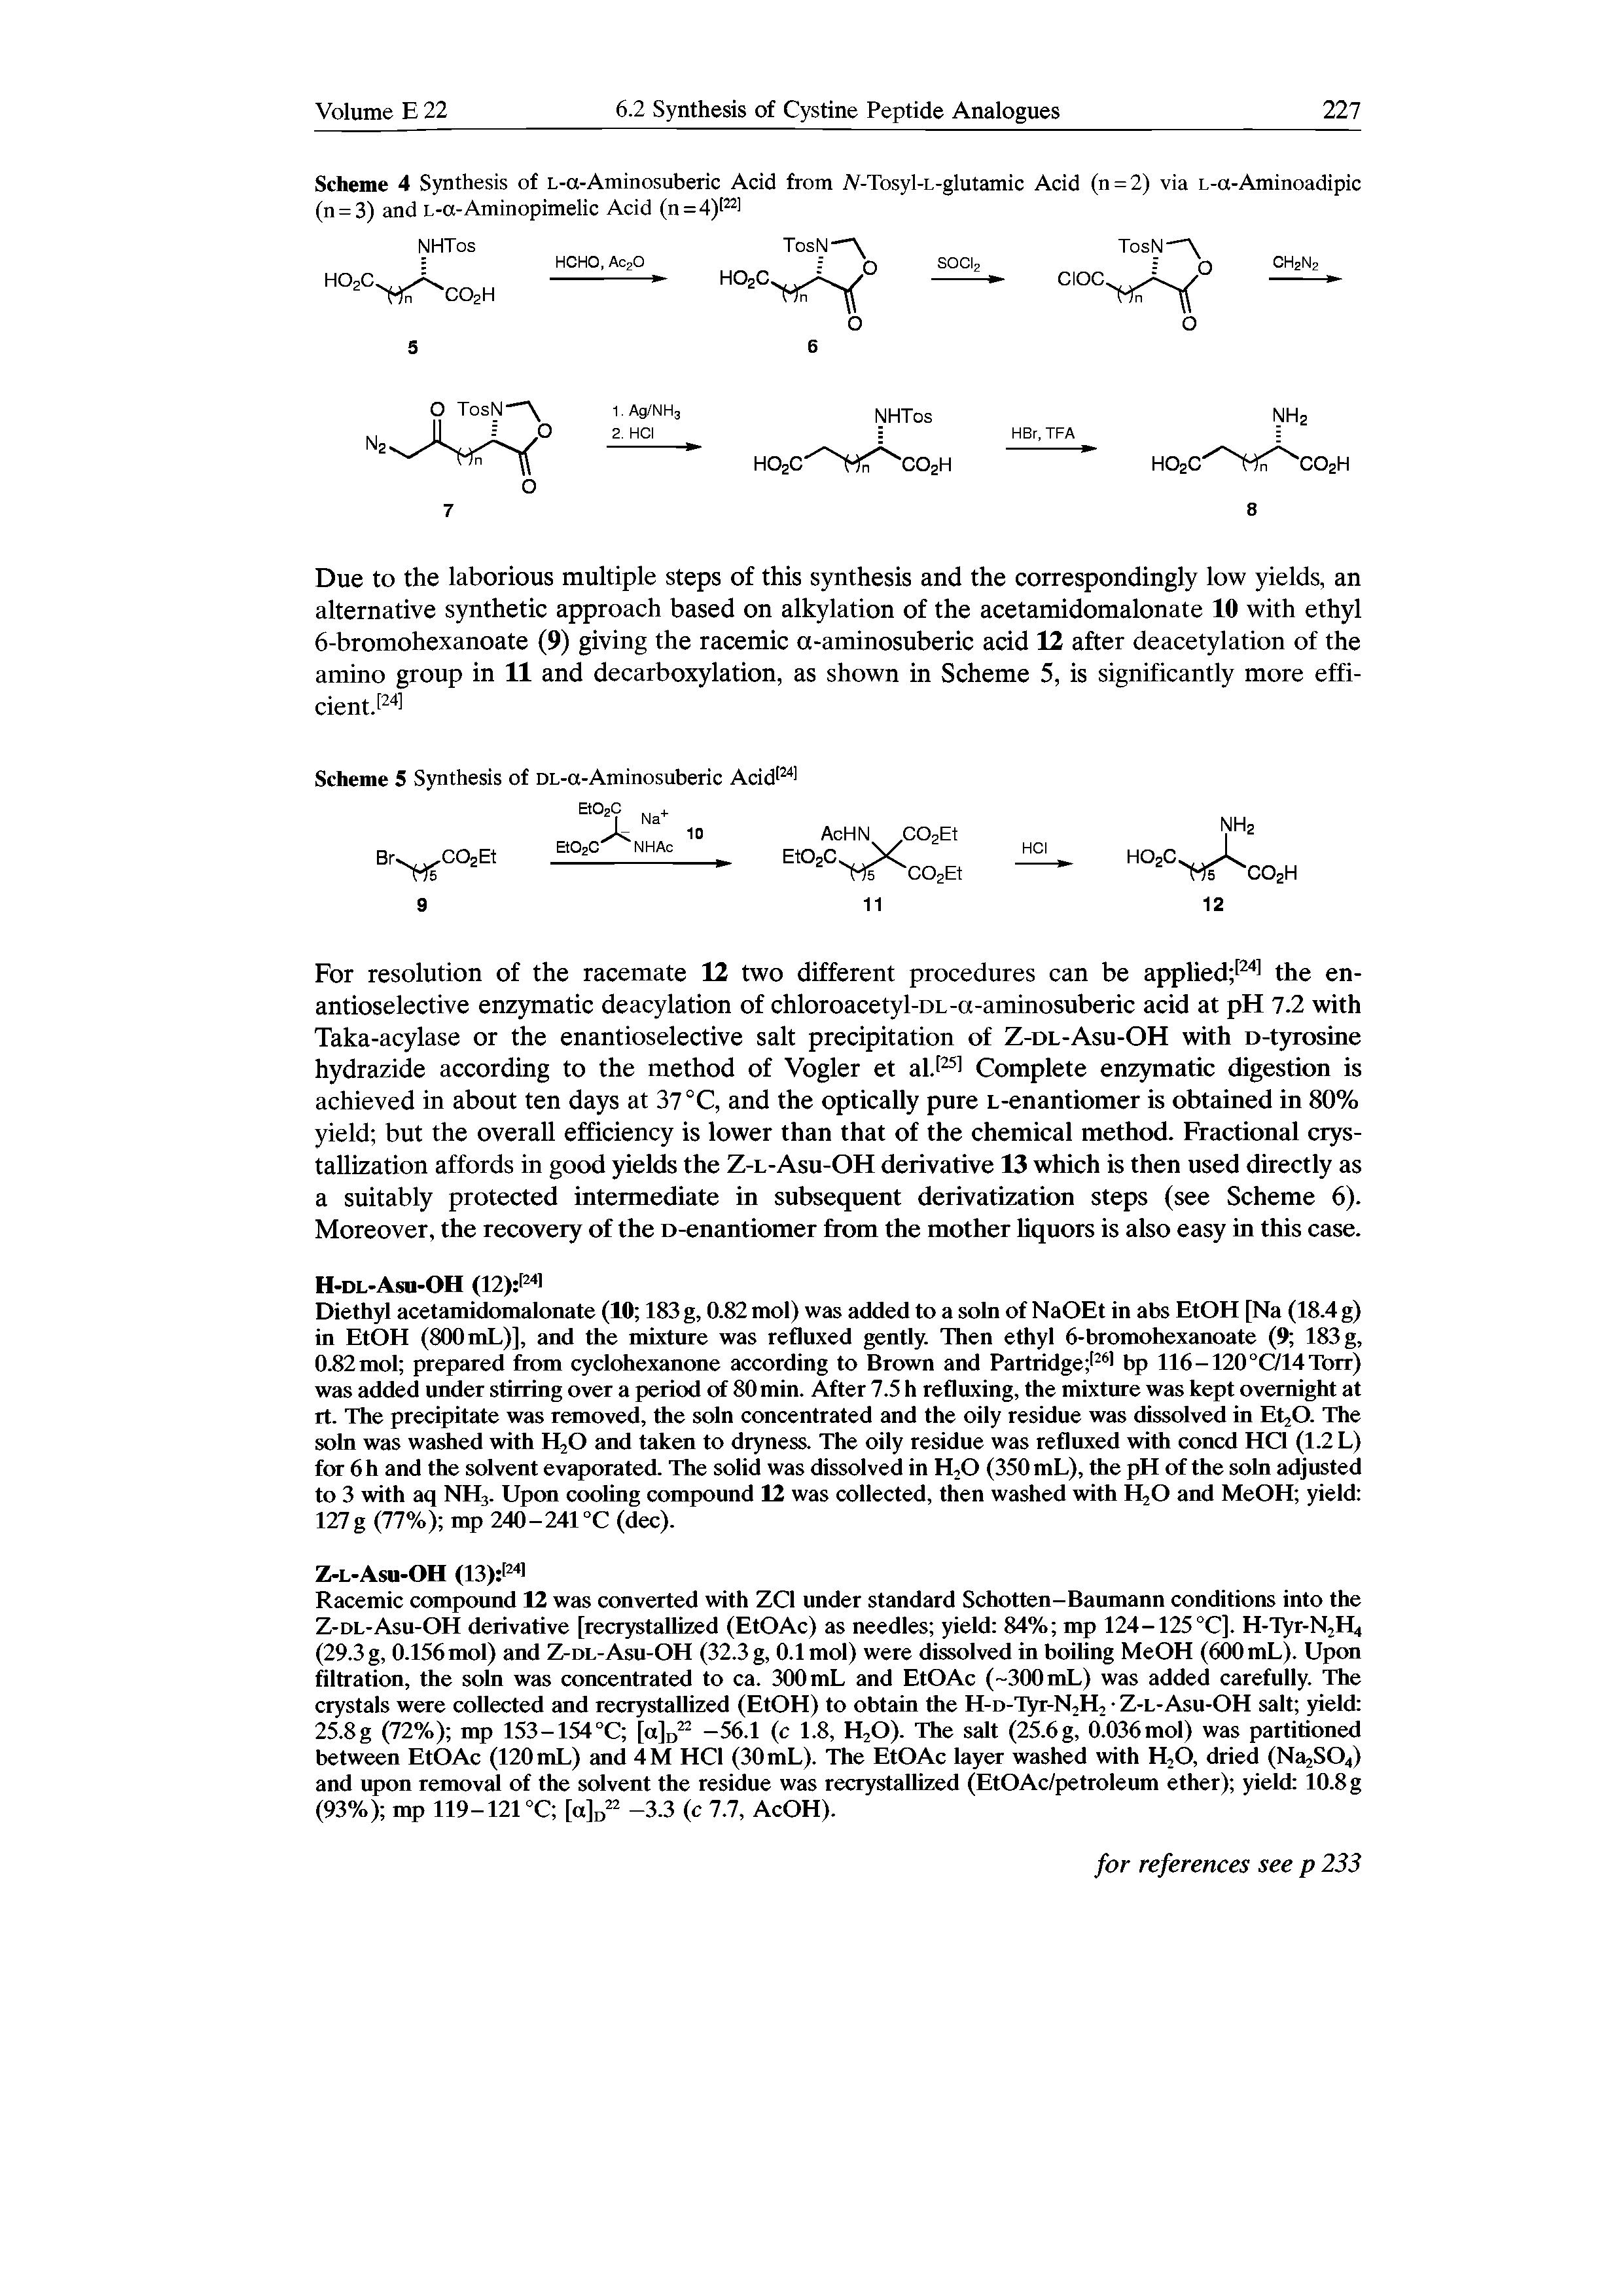 Scheme 4 Synthesis of L-a-Aminosuberic Acid from A-Tosyl-i.-glutamic Acid (n = 2) via L-a-Aminoadipic (n = 3) and L-a-Aminopimelic Acid (n = 4) 22 ...